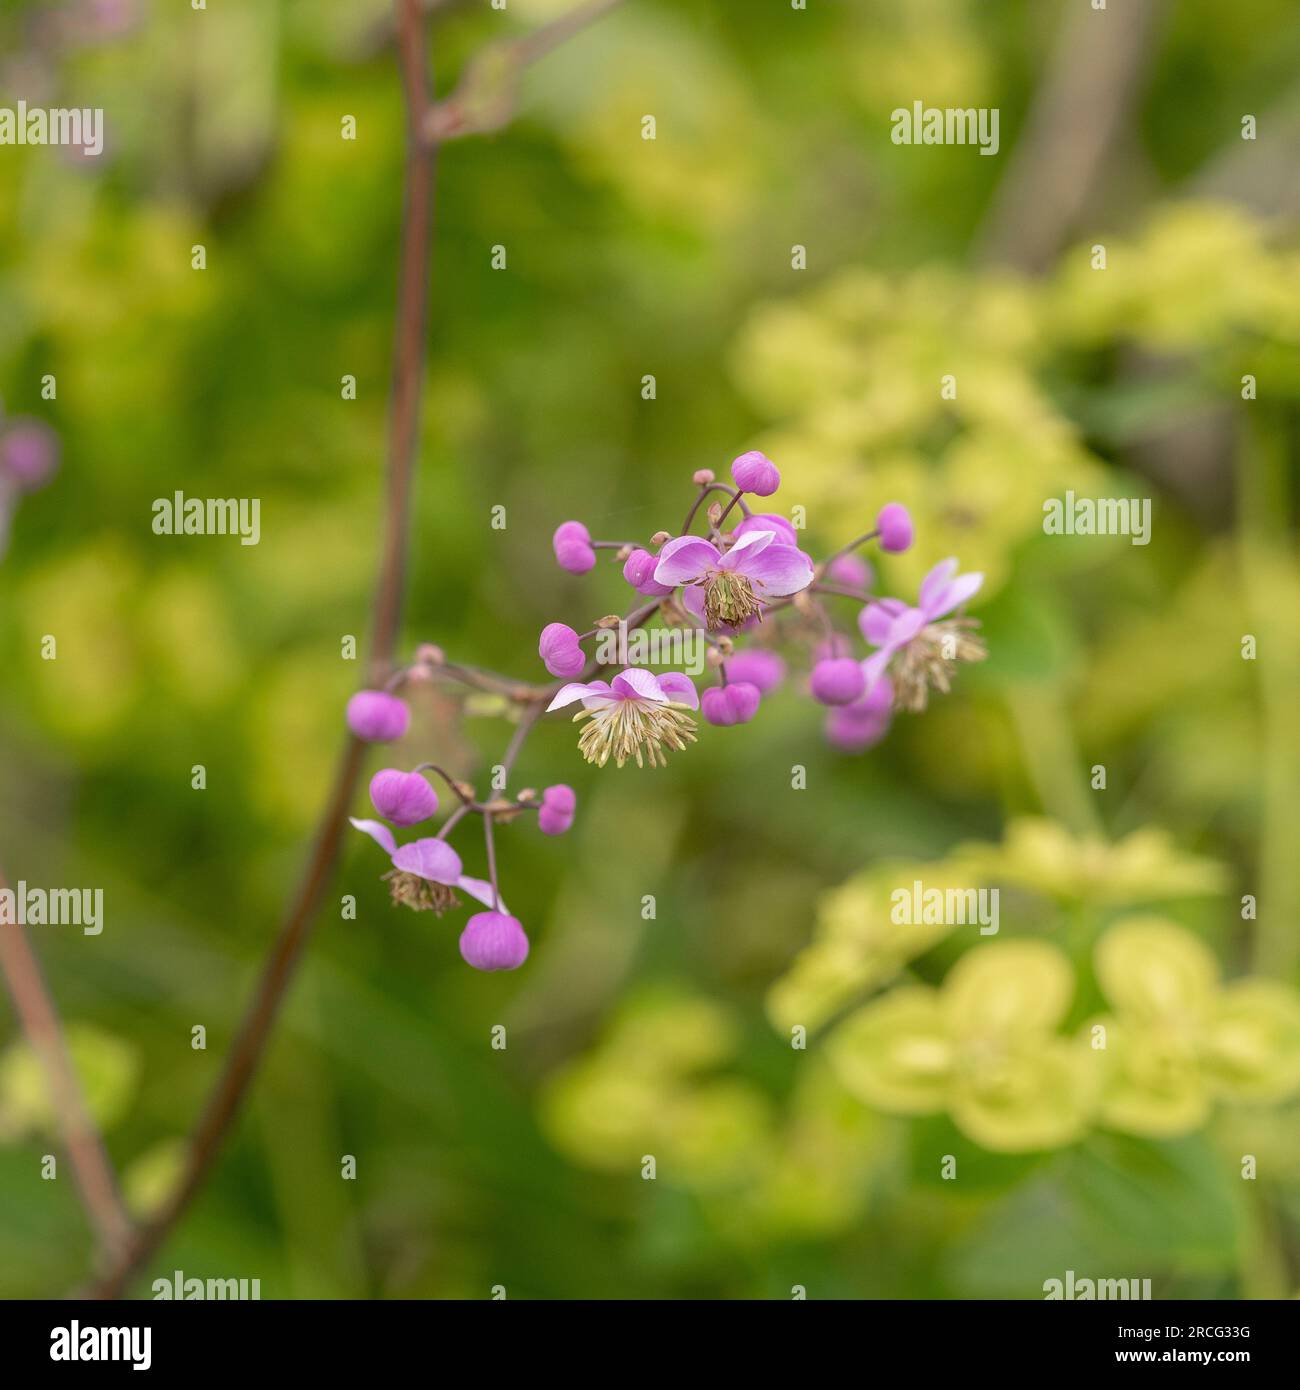 Close-up of the soft mauve flowers of Thalictrum Delavayi, commonly called Chinese meadow rue growing in a garden. UK Stock Photo